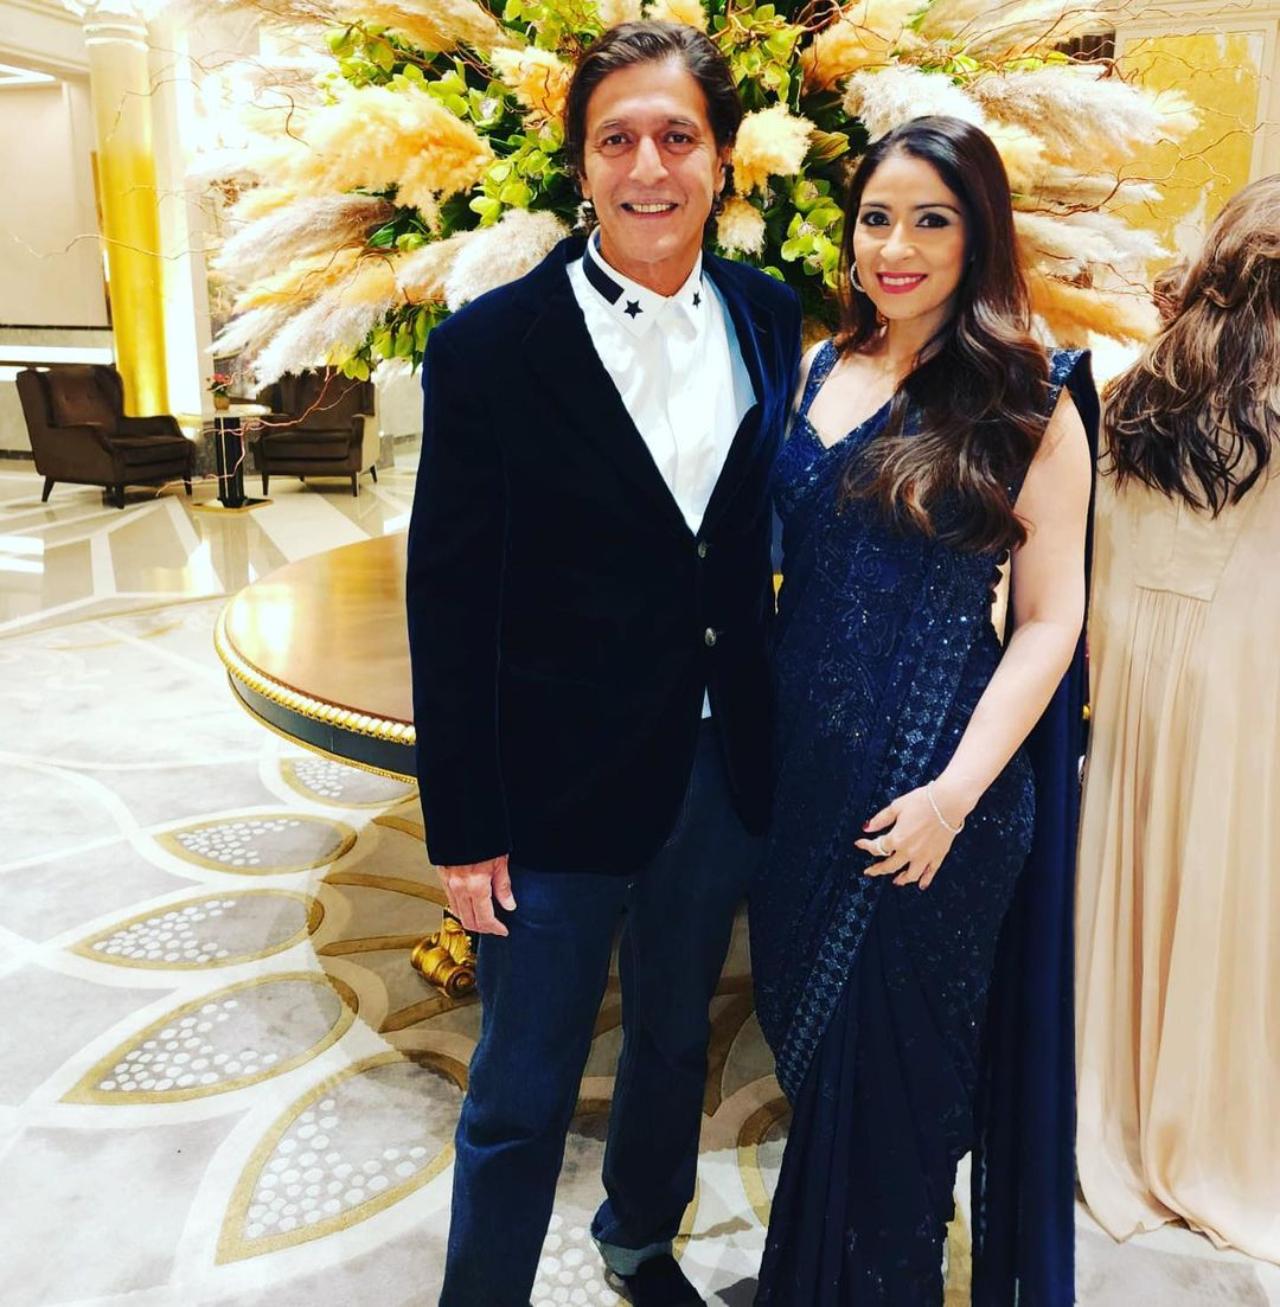 Bhavana and Chunky Pandey look stunning as they dress up for the wedding. While Chunky looks stylish in a three-piece suit, Bhavana looks gorgeous in a blue sequin saree